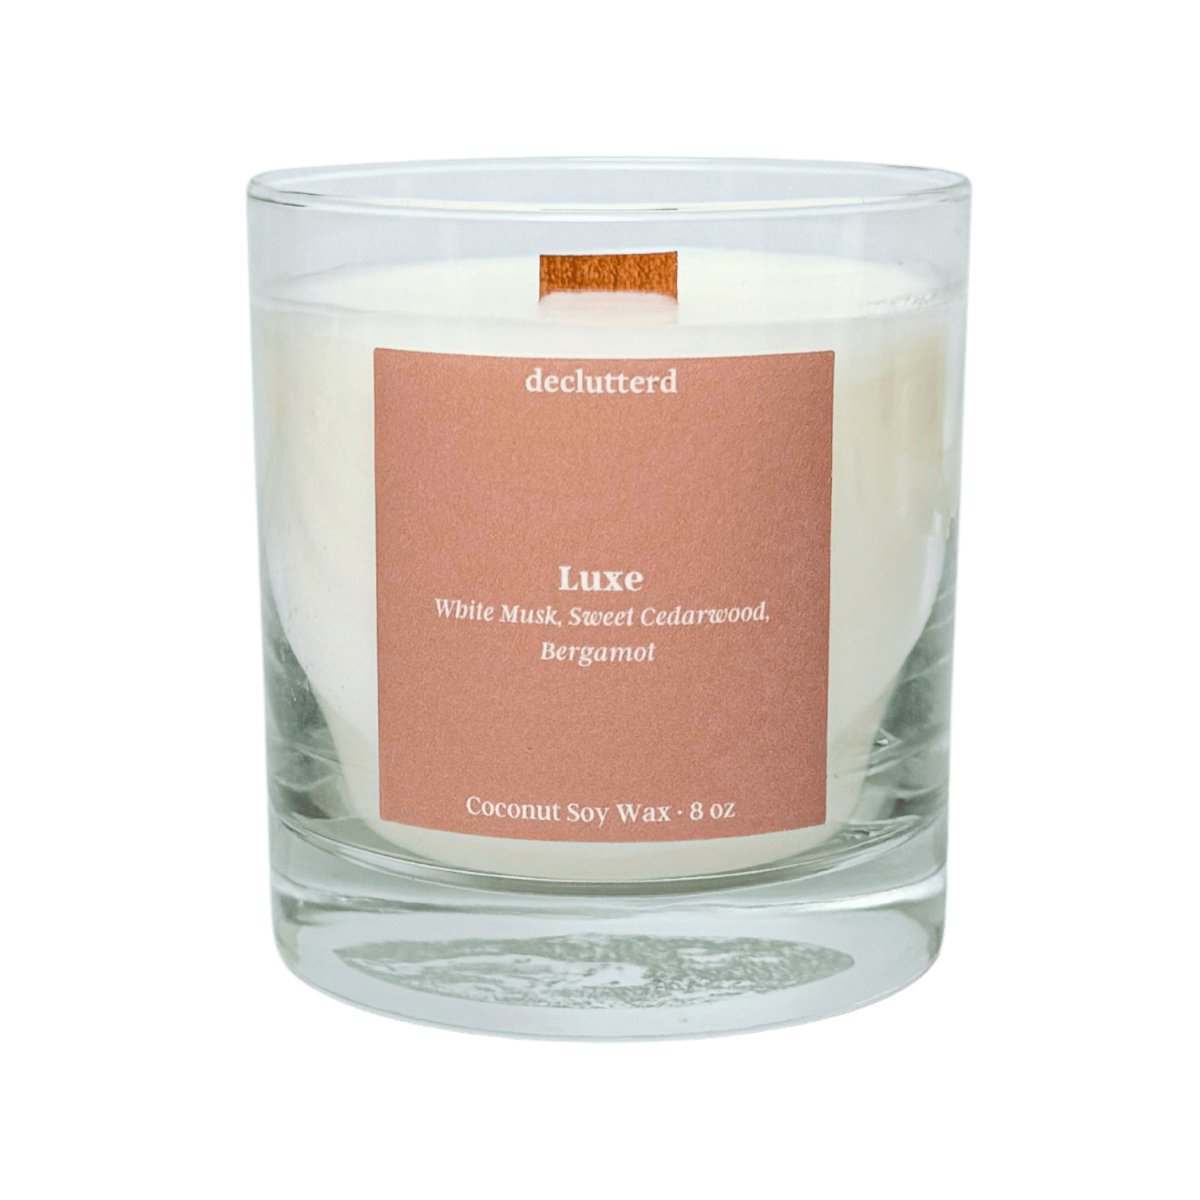 declutterd Luxe Wood Wick Candle - lily & onyx